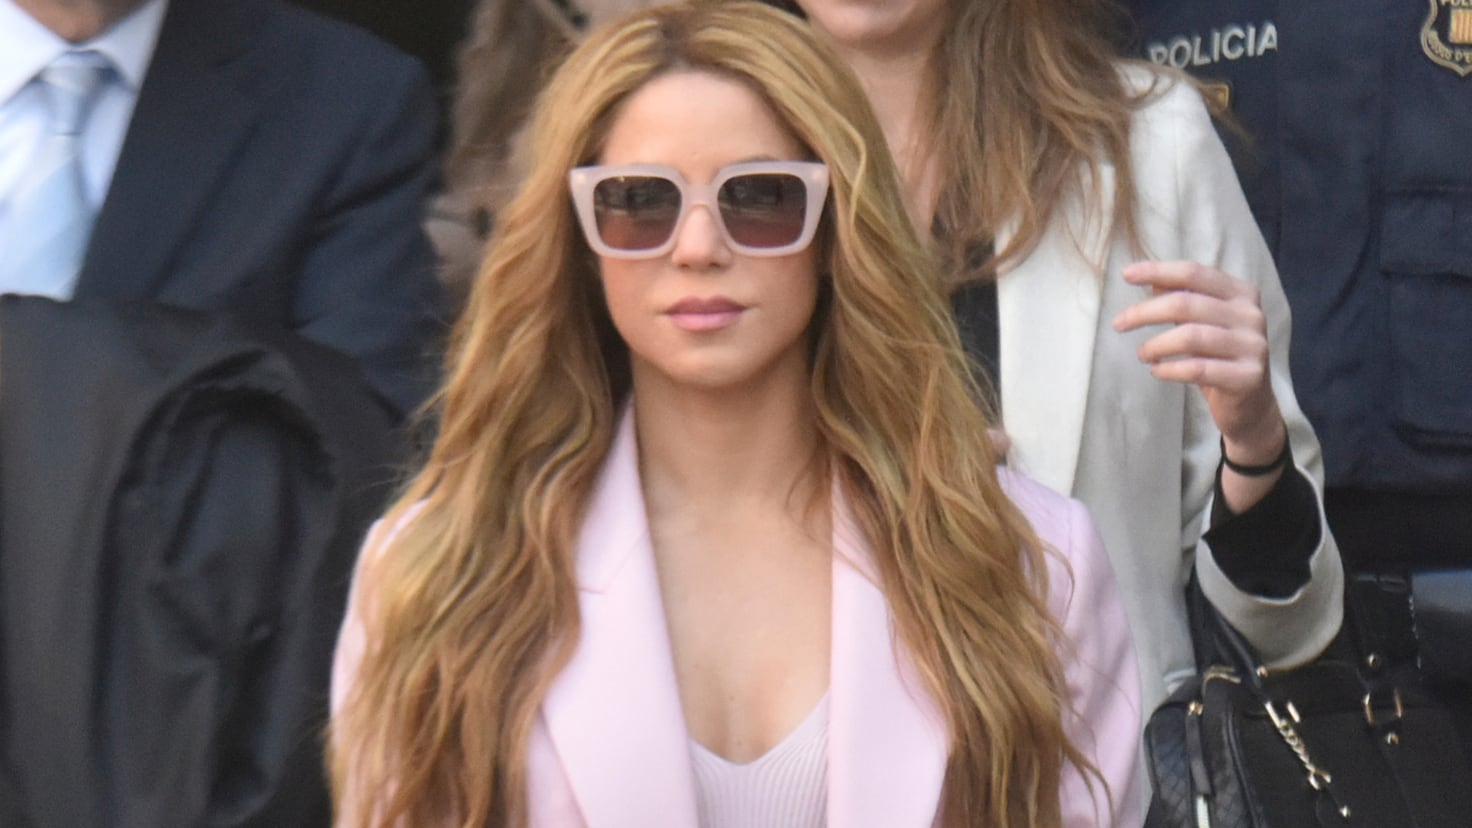 Why doesn't Shakira go to prison if her sentence is more than two years?
